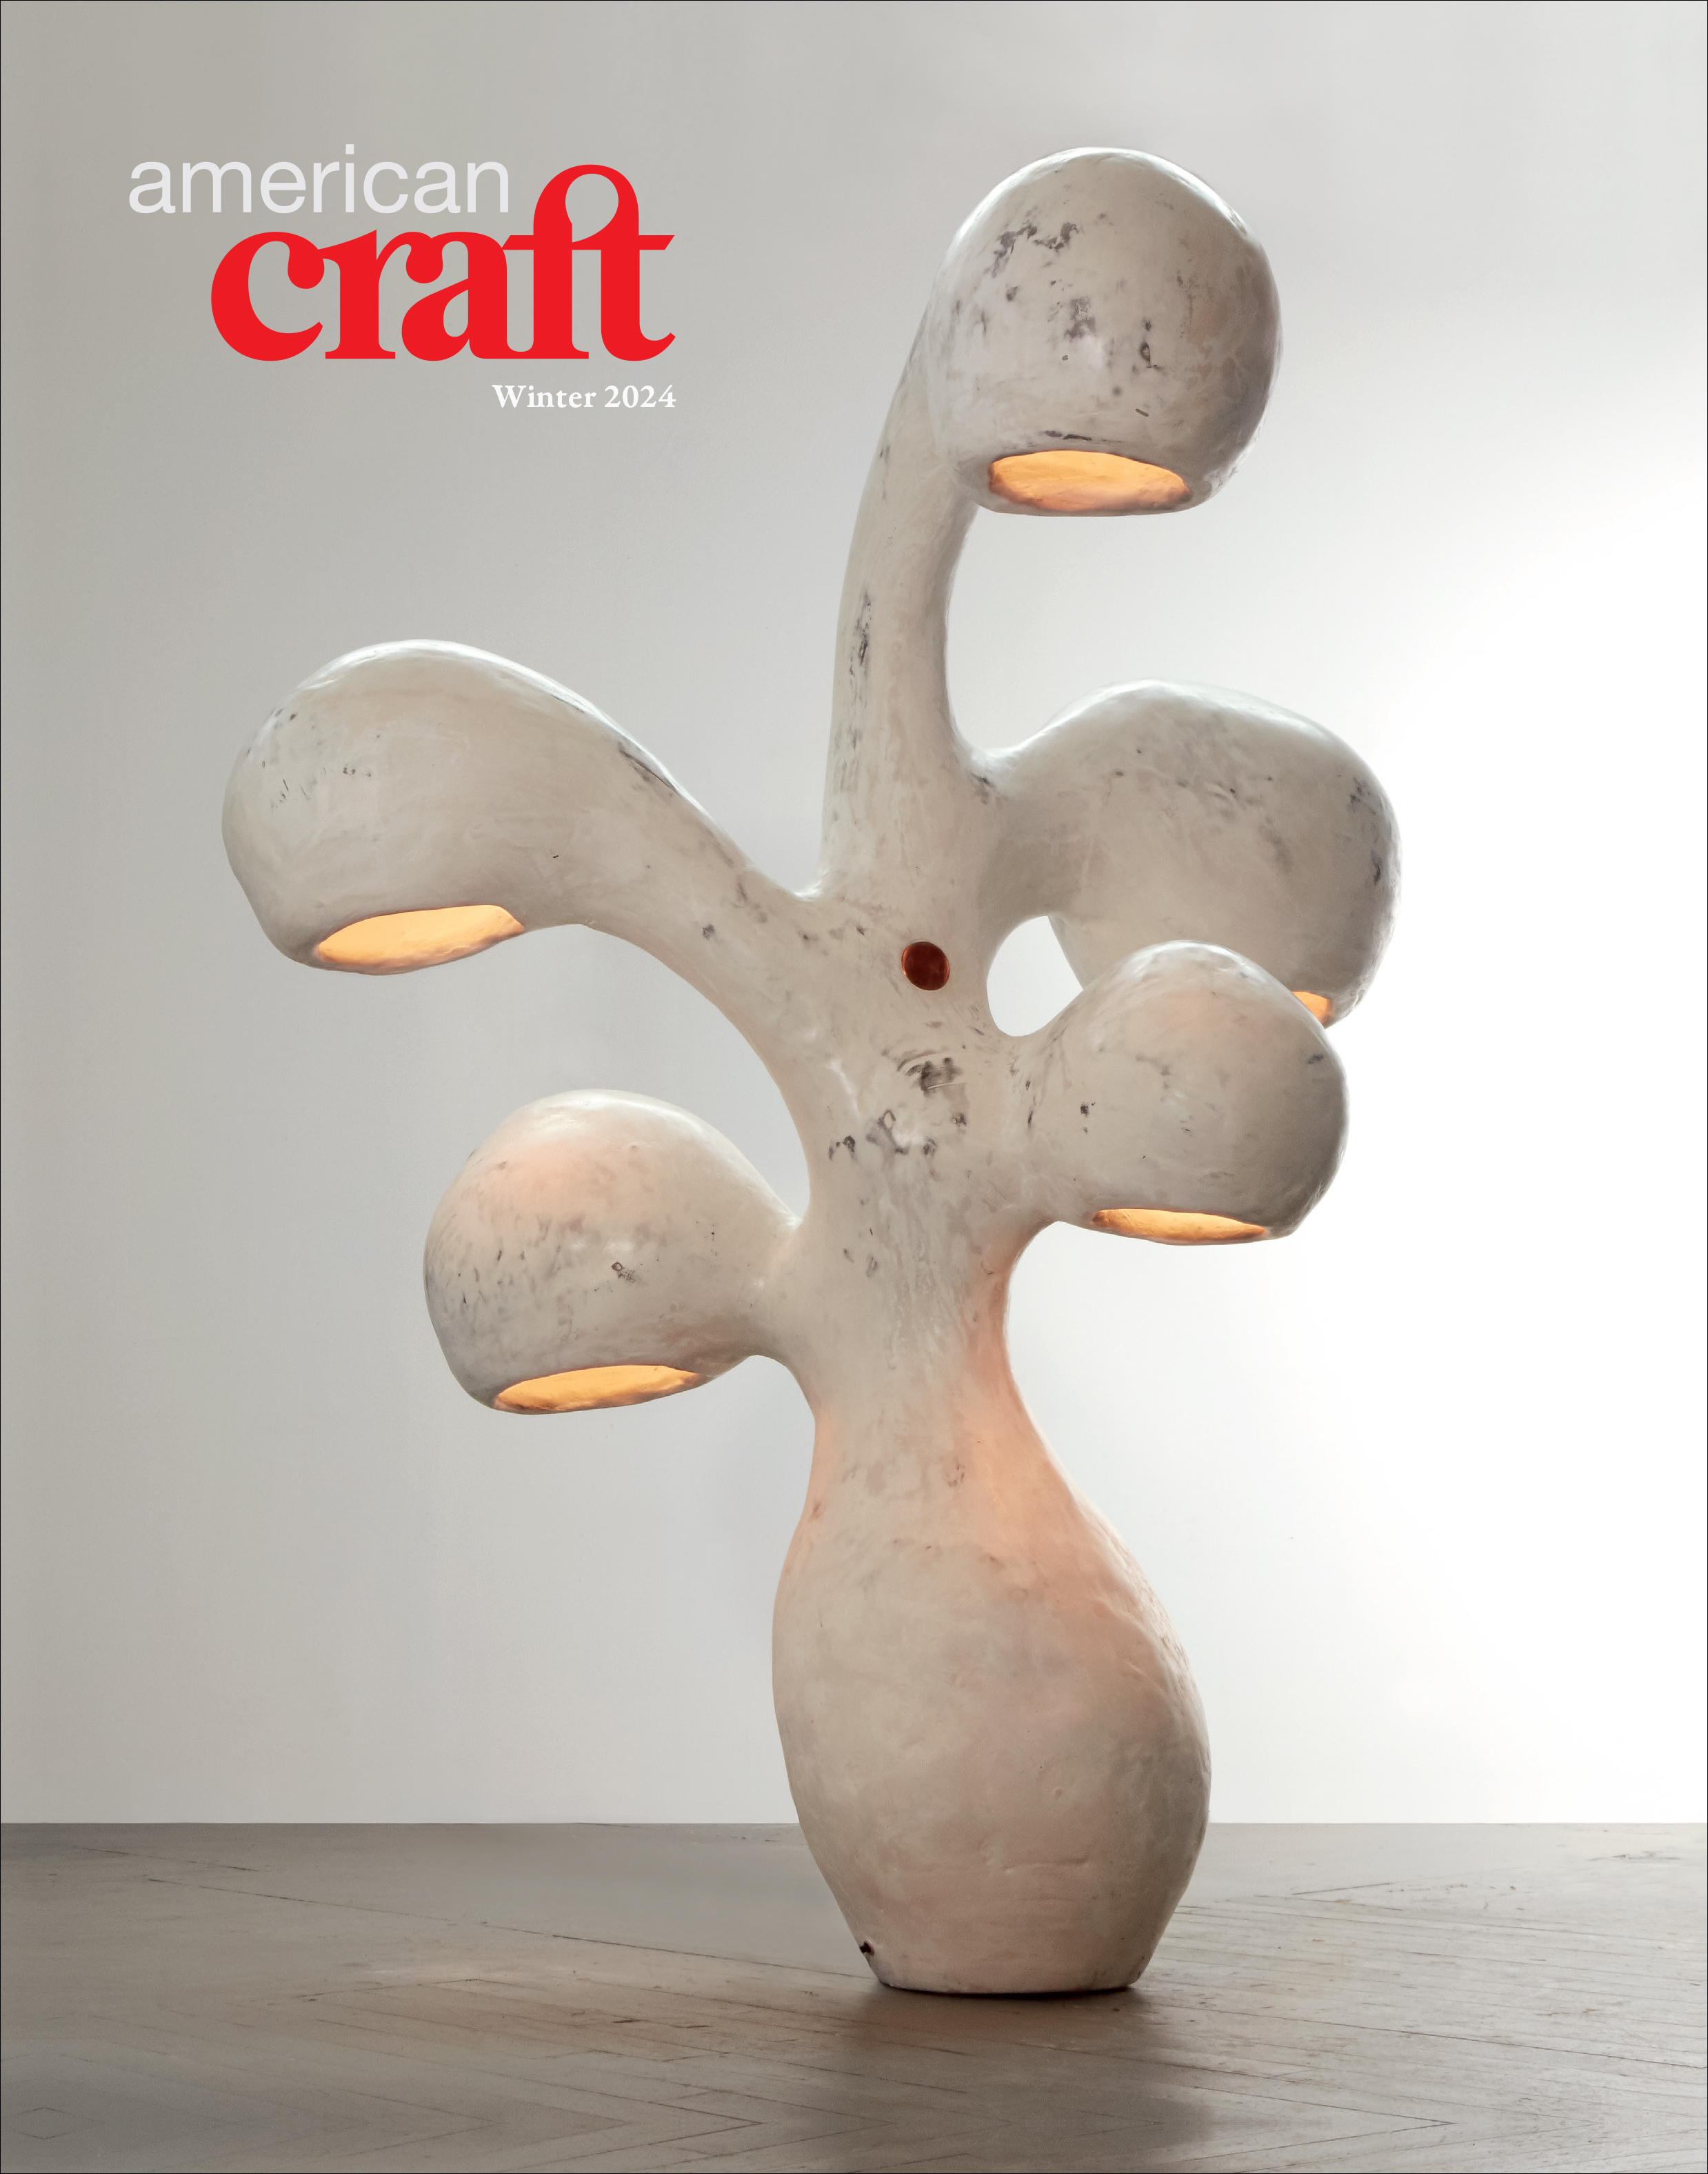 The cover of the Winter 2024 issue of American Craft features an untitled lamp from Rogan Gregory’s Fertility Form series, 2019, gypsum and copper, 77 X 47 X 60 in. Photo courtesy of R & Company.